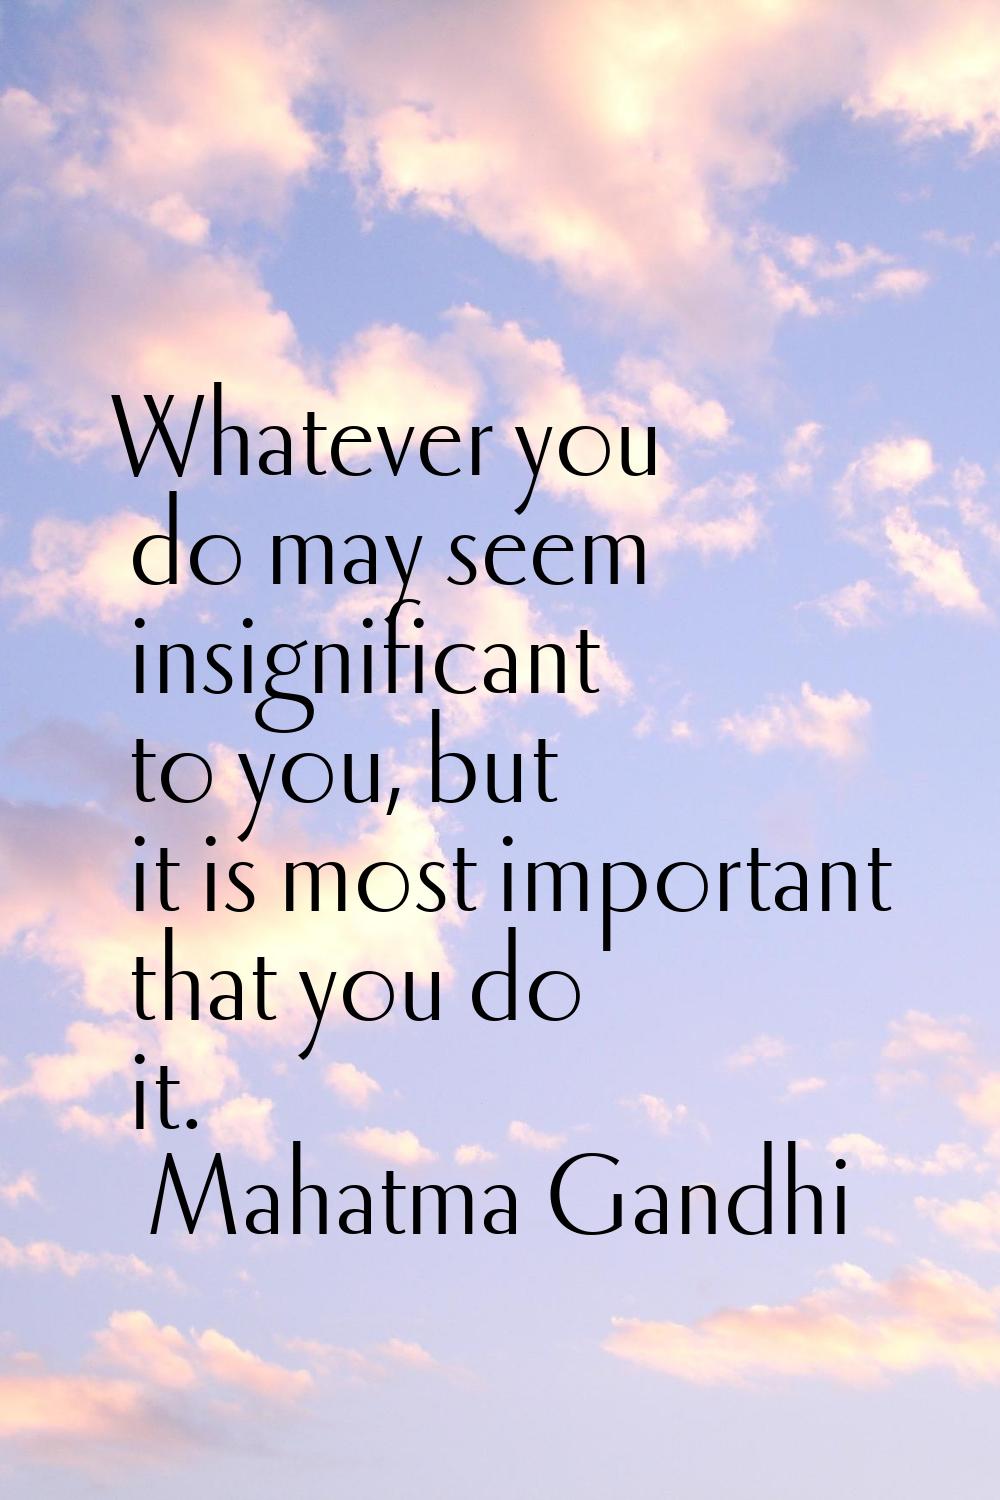 Whatever you do may seem insignificant to you, but it is most important that you do it.